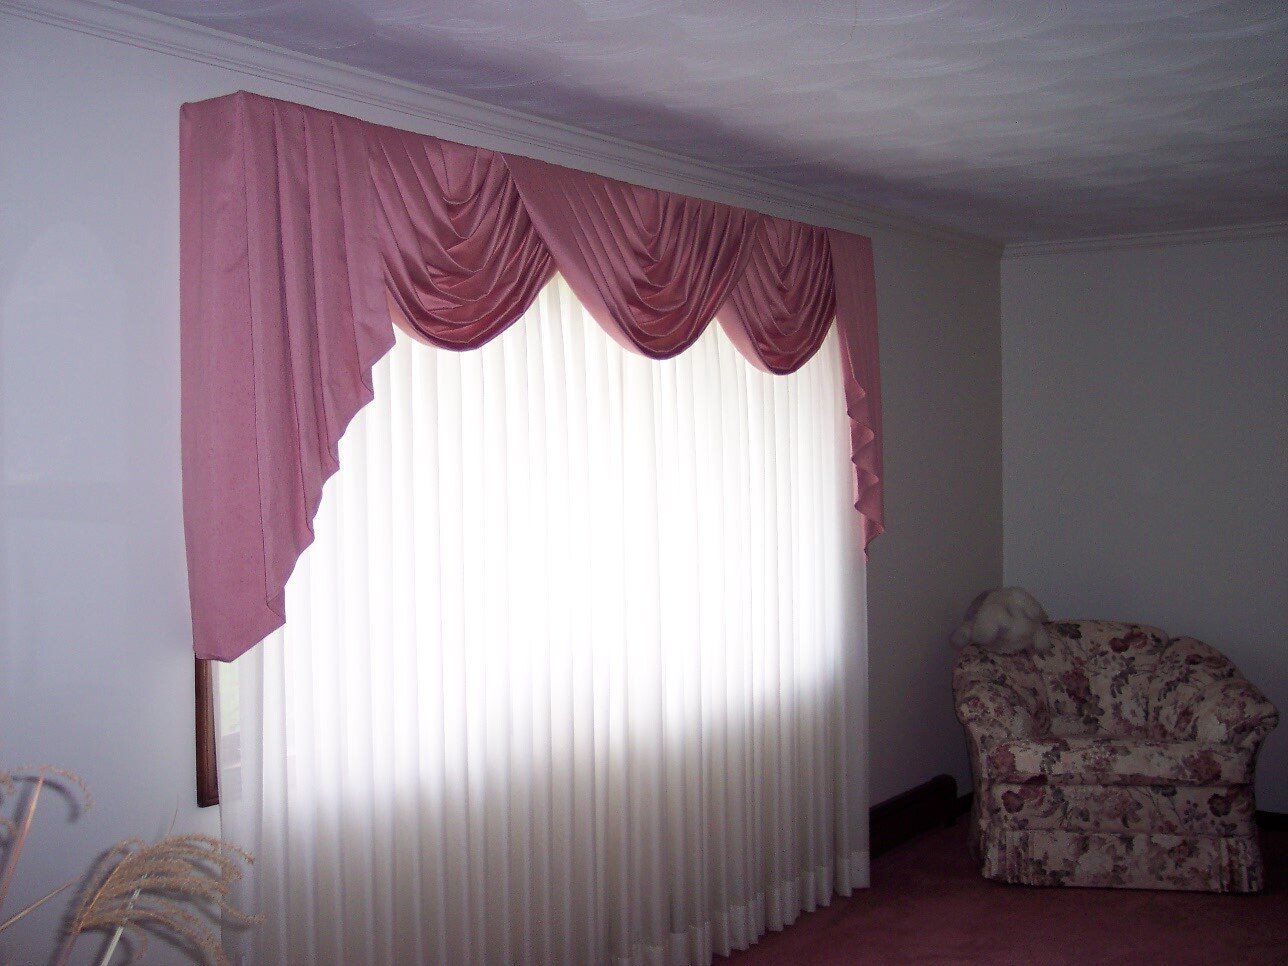 Custom Made Draperies, Curtains, Top Treatments, Valances, Shades, Blinds, Graber, Hunter Douglas, Bed Spreads, Dust Ruffles, Pillows, Cushions, Drapery Rods, Drapery Hardware, Interior Decorating, Interior Design, Remodeling, Syracuse NY, Central NY